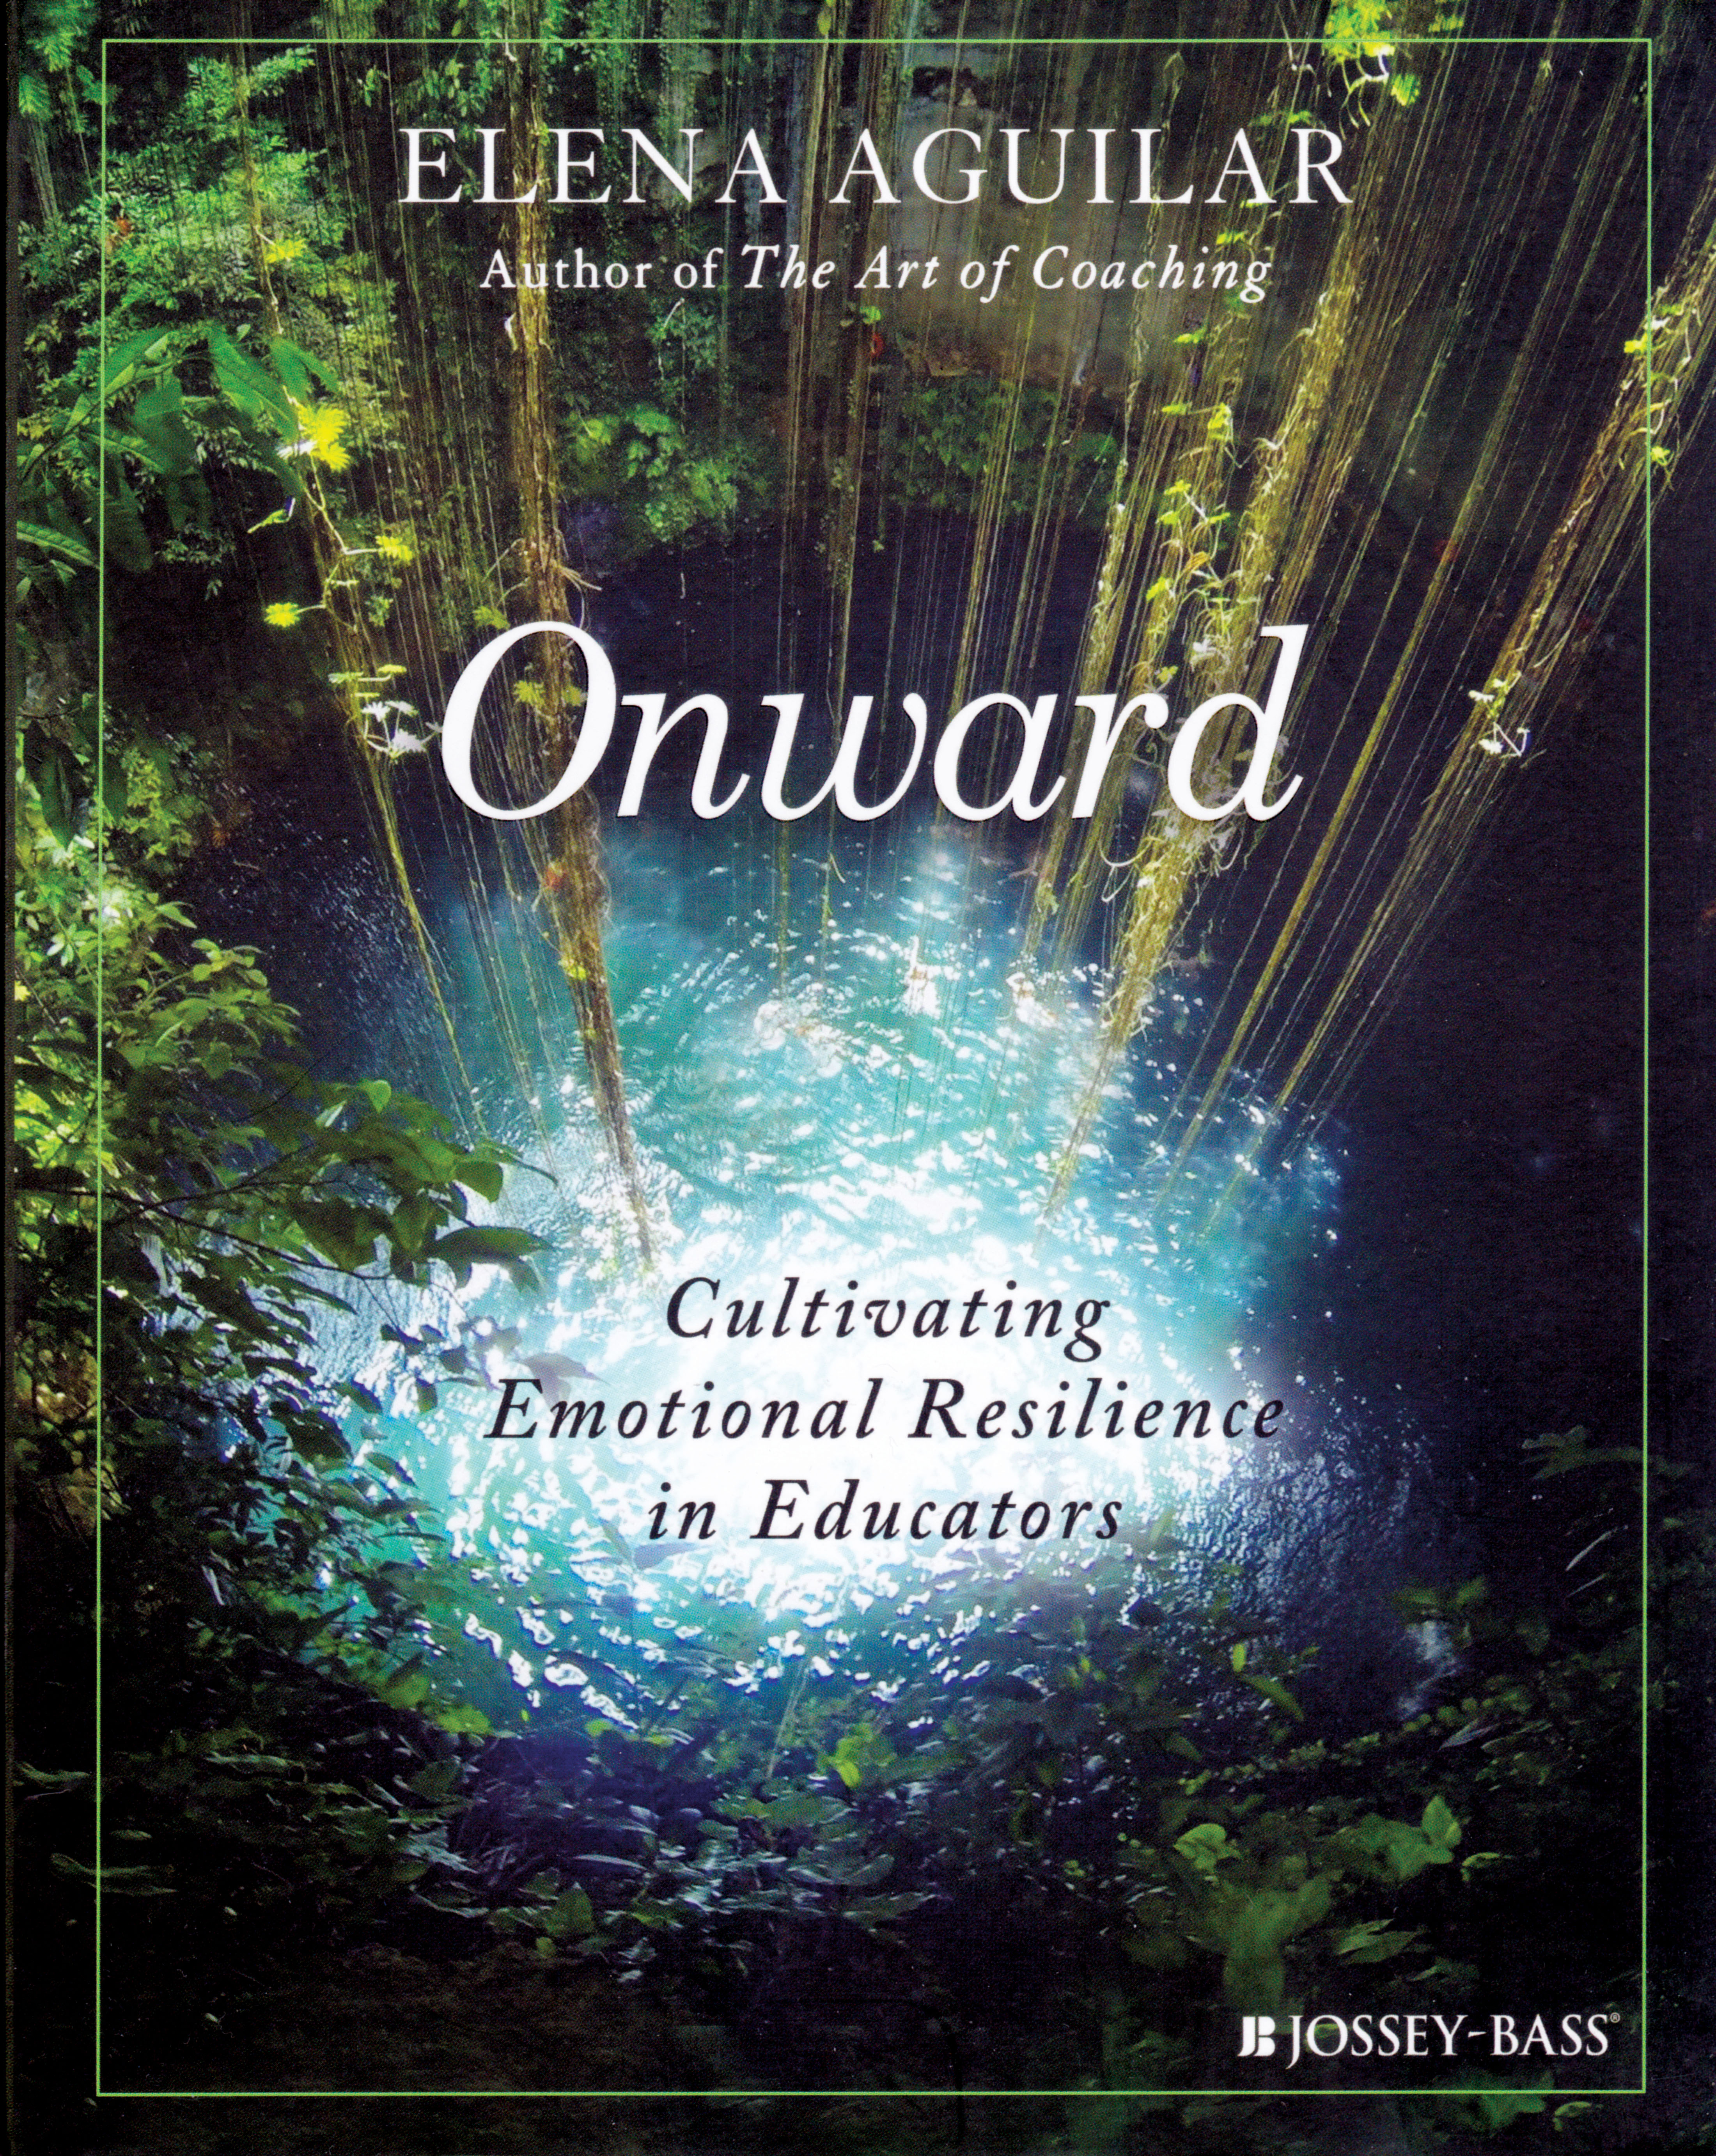 Photo of a book cover for 'Onward.' The cover is a photo from the top of a forest with light shining down on the ground.